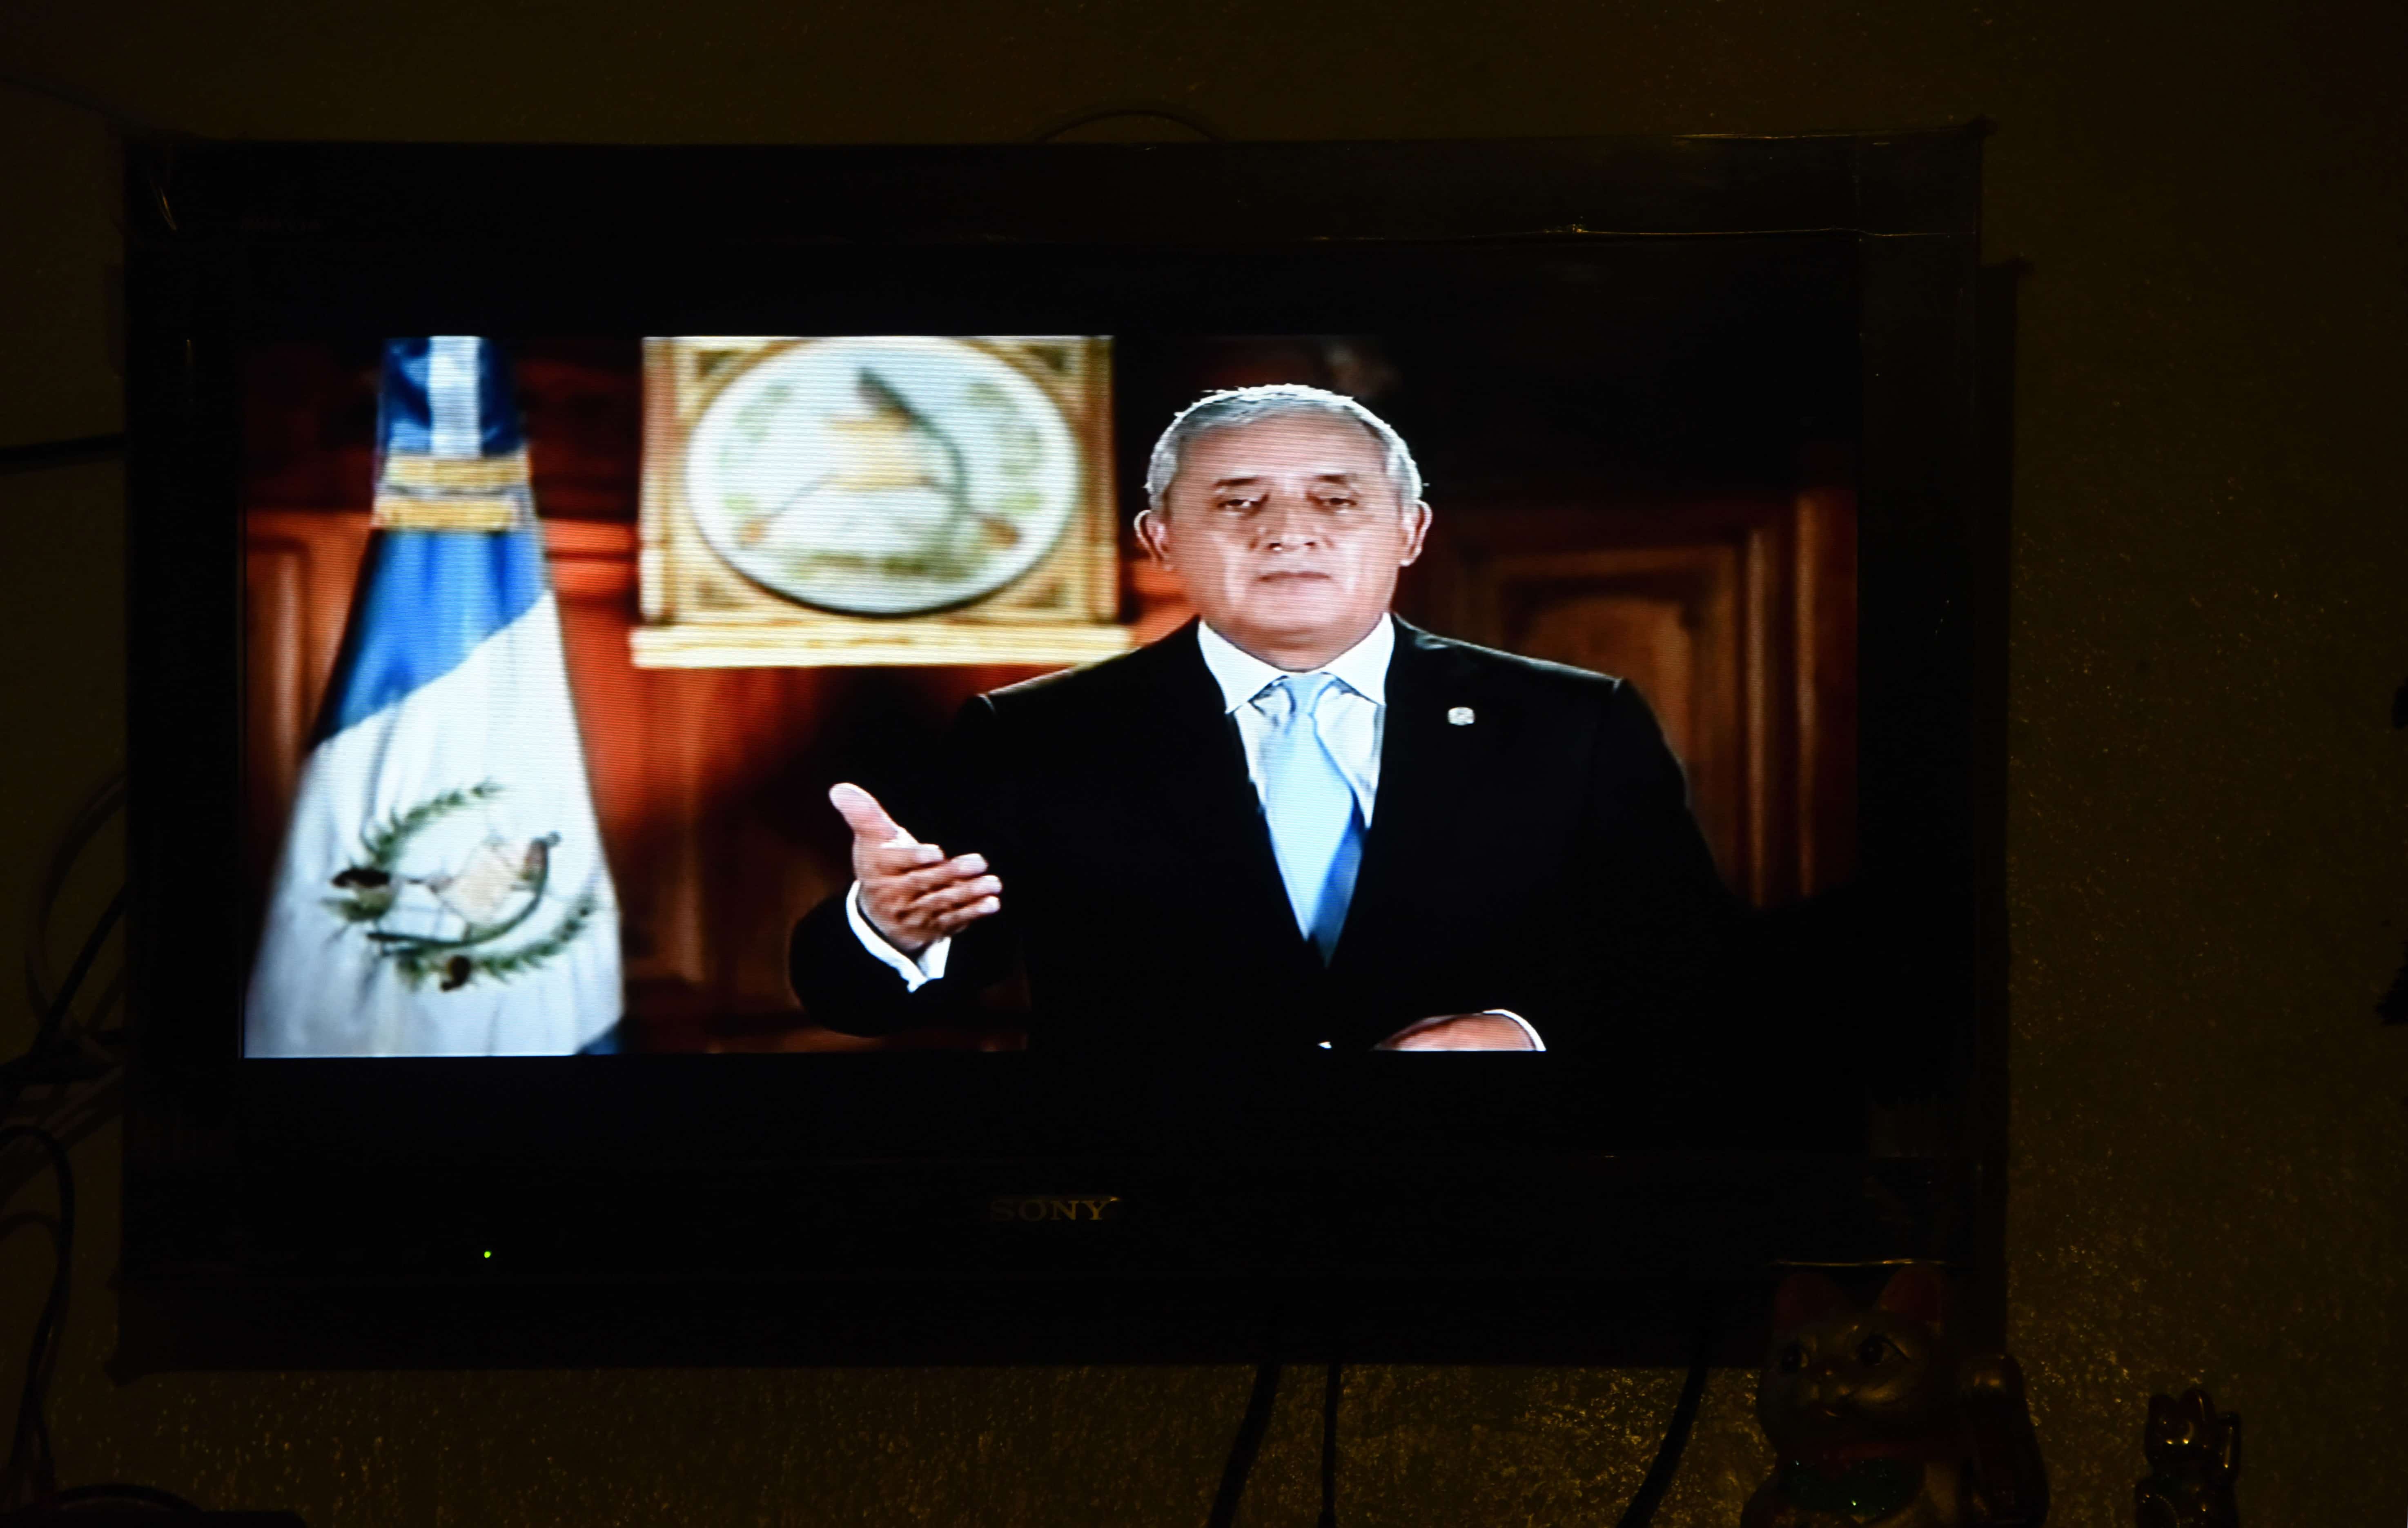 Guatemalan President Otto Pérez Molina's live broadcast is seen at a restaurant in Guatemala City.